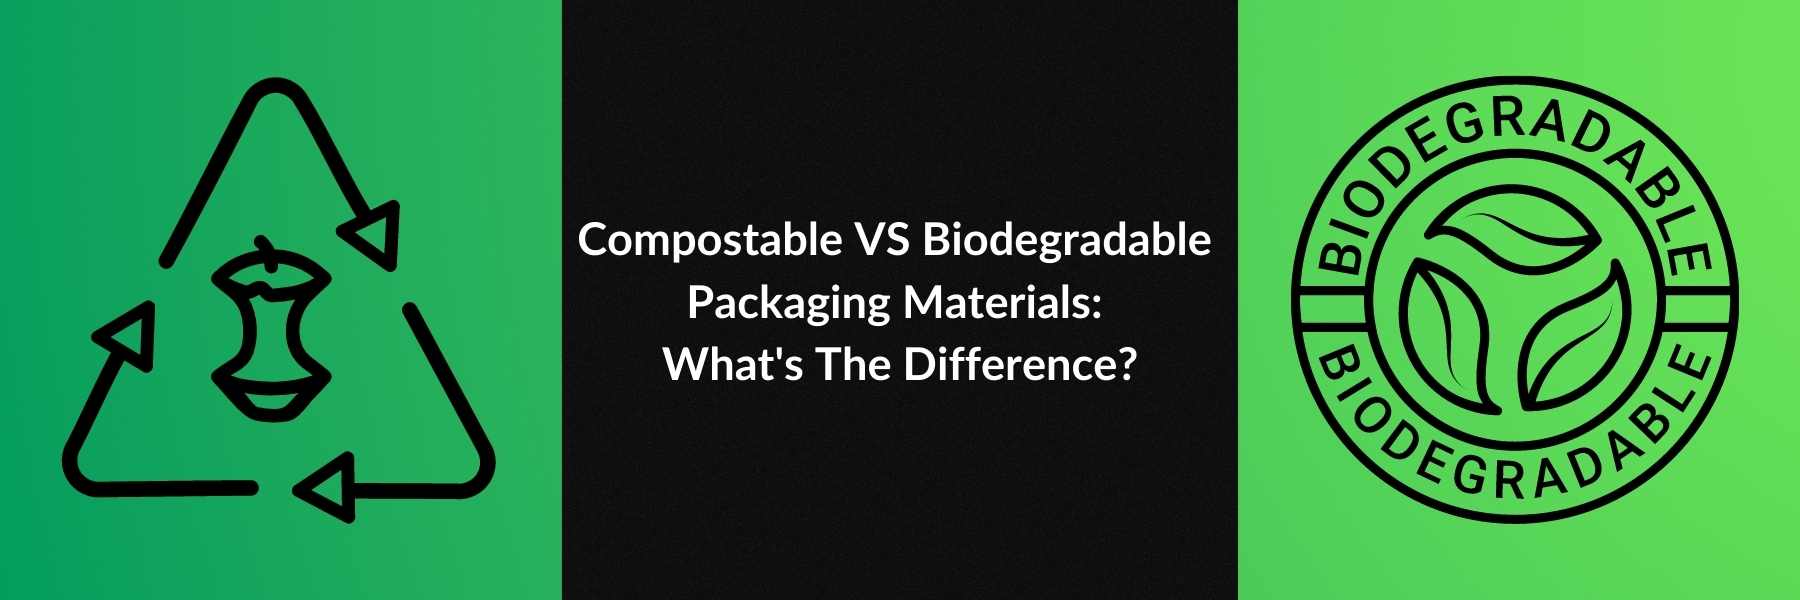 Compostable VS Biodegradable Packaging Materials: What's The Difference?